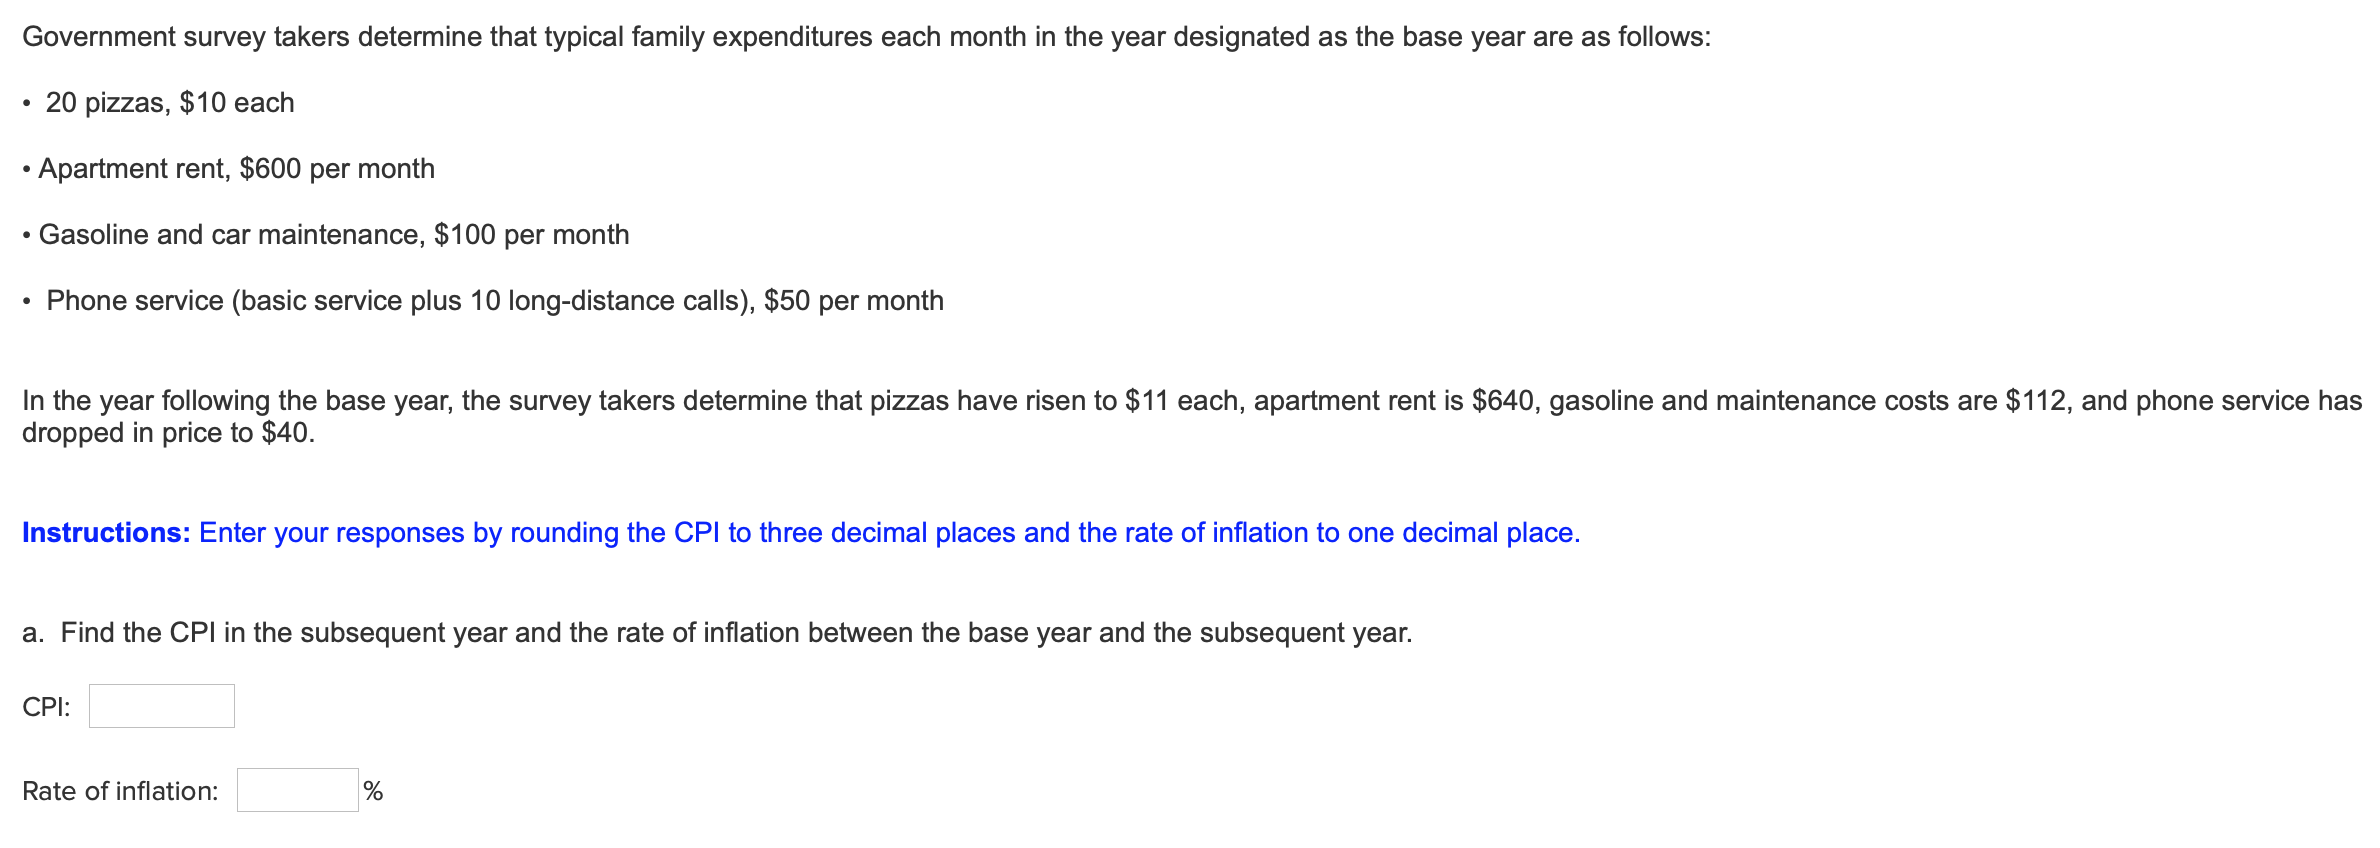 Government survey takers determine that typical family expenditures each month in the year designated as the base year are as follows:
20 pizzas, $10 each
Apartment rent, $600 per month
Gasoline and car maintenance, $100 per month
Phone service (basic service plus 10 long-distance calls), $50 per month
In the year following the base year, the survey takers determine that pizzas have risen to $11 each, apartment rent is $640, gasoline and maintenance costs are $112, and phone service has
dropped in price to $40.
Instructions: Enter your responses by rounding the CPl to three decimal places and the rate of inflation to one decimal place.
a. Find the CPl in the subsequent year and the rate of inflation between the base year and the subsequent year.
CPI:
Rate of inflation:
